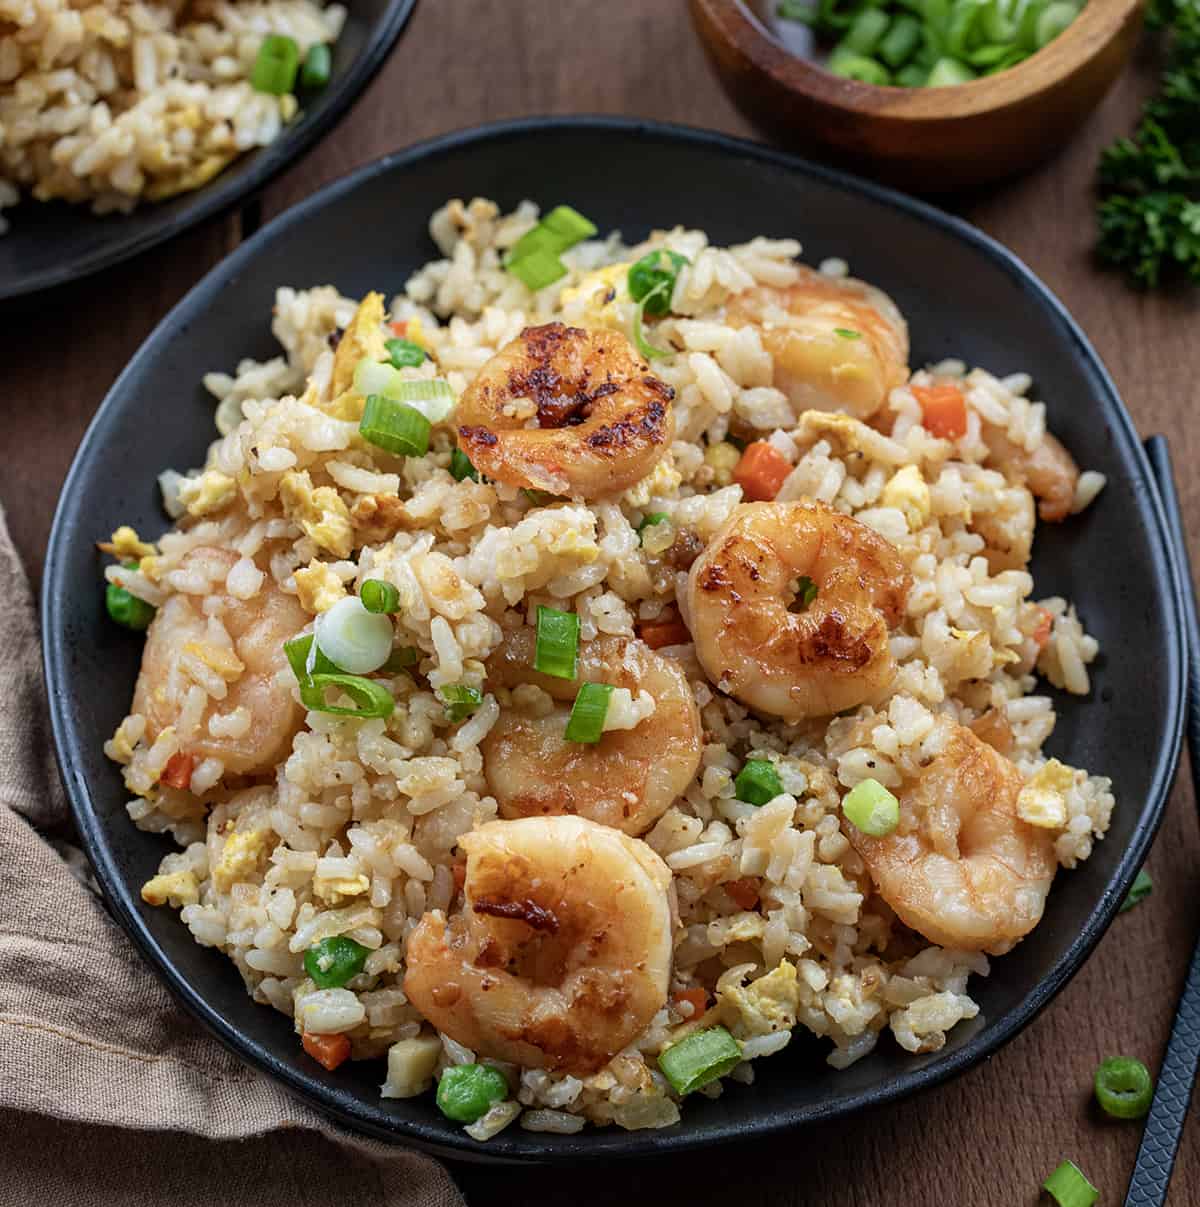 Plates of Shrimp Fried Rice on a wooden table.